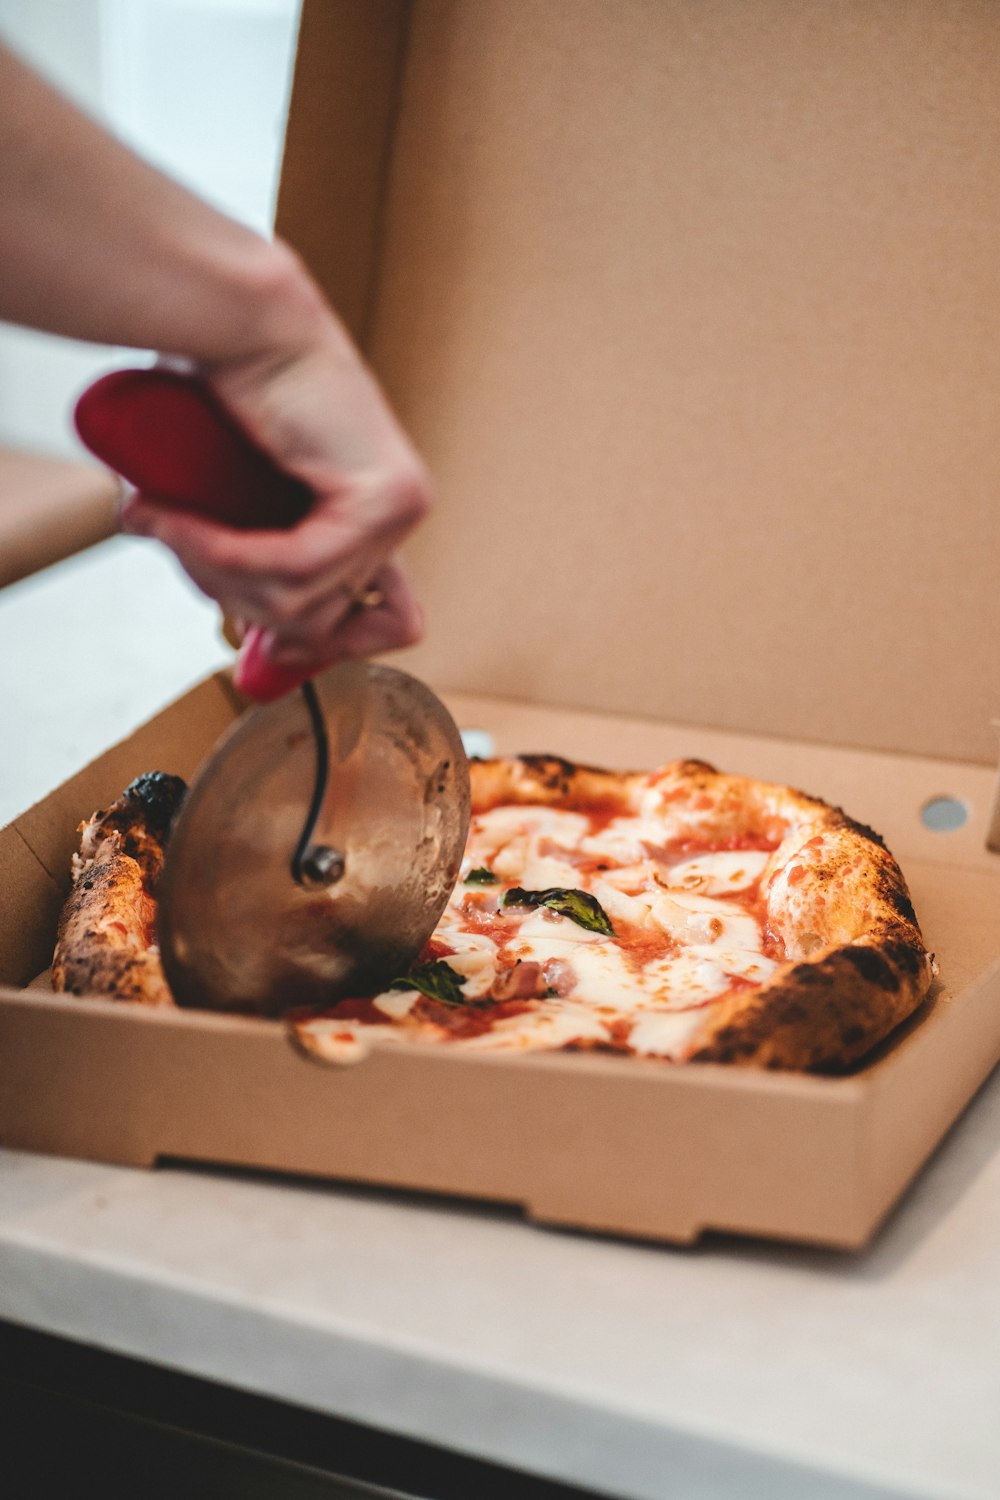 a person putting a pizza in a box